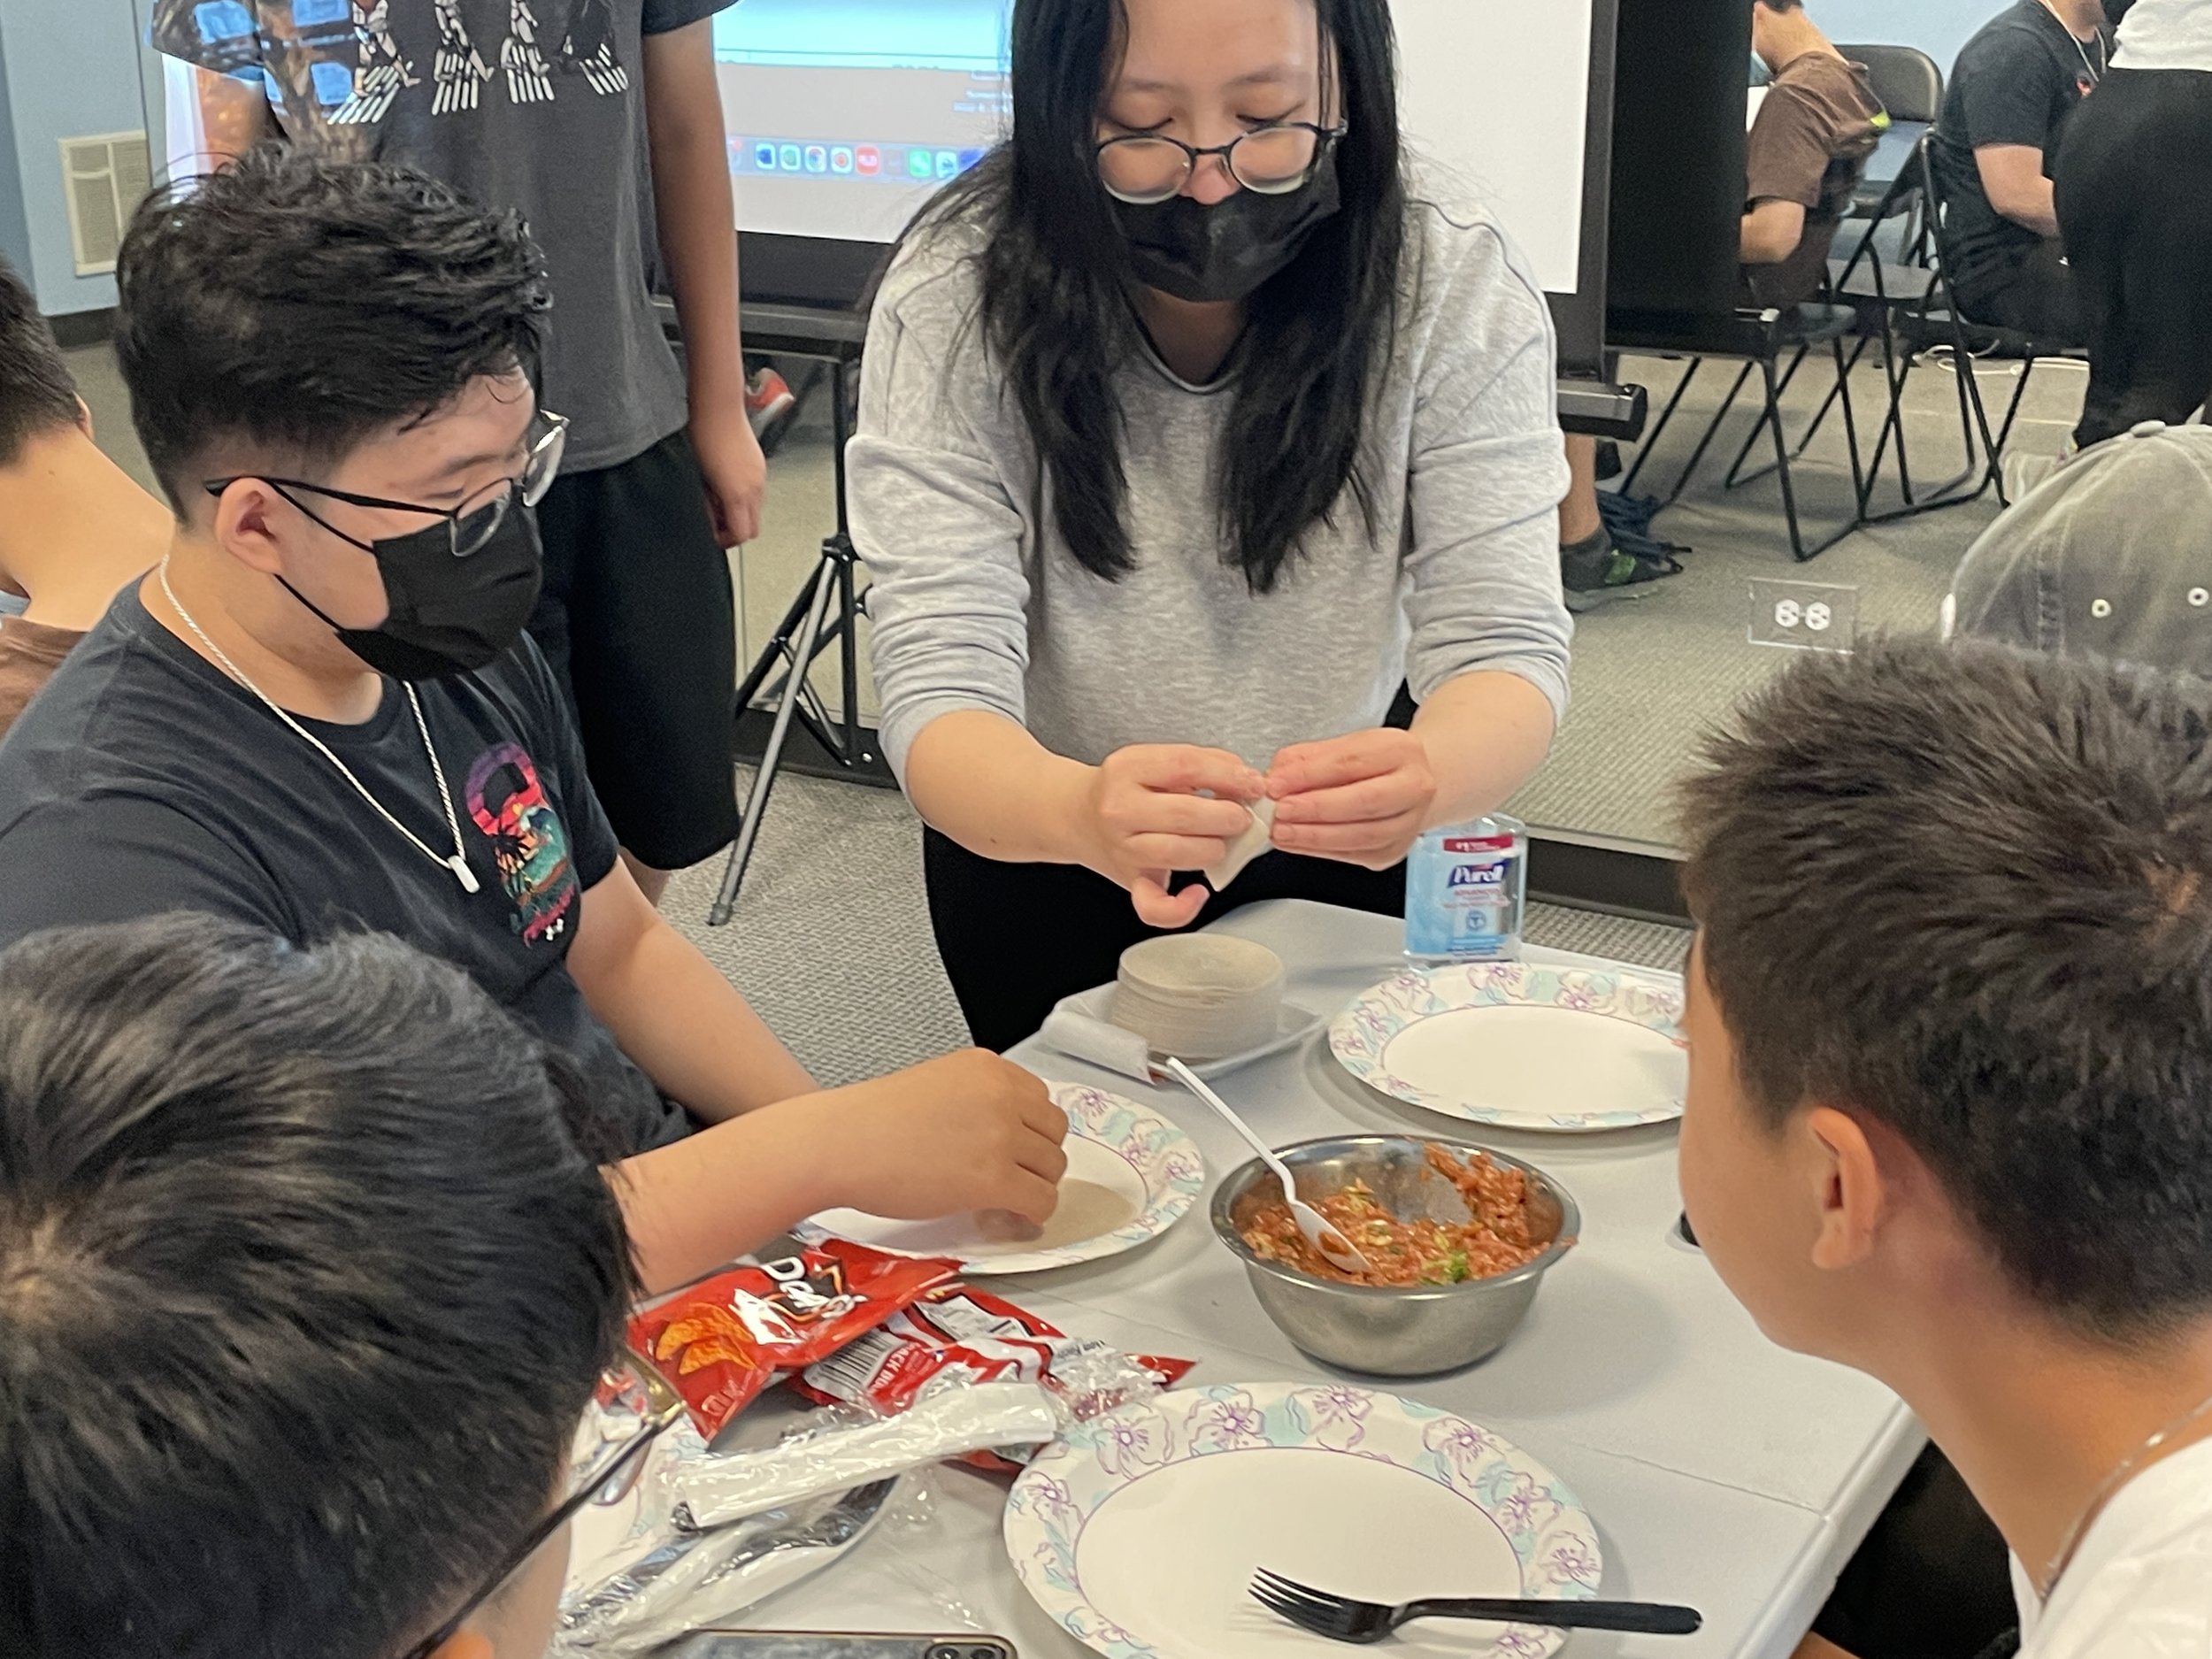  During After School Matters, our instructor taught on the history of dumpling-making within Asian cultures. Students got to enjoy their own creations after the demonstration! 